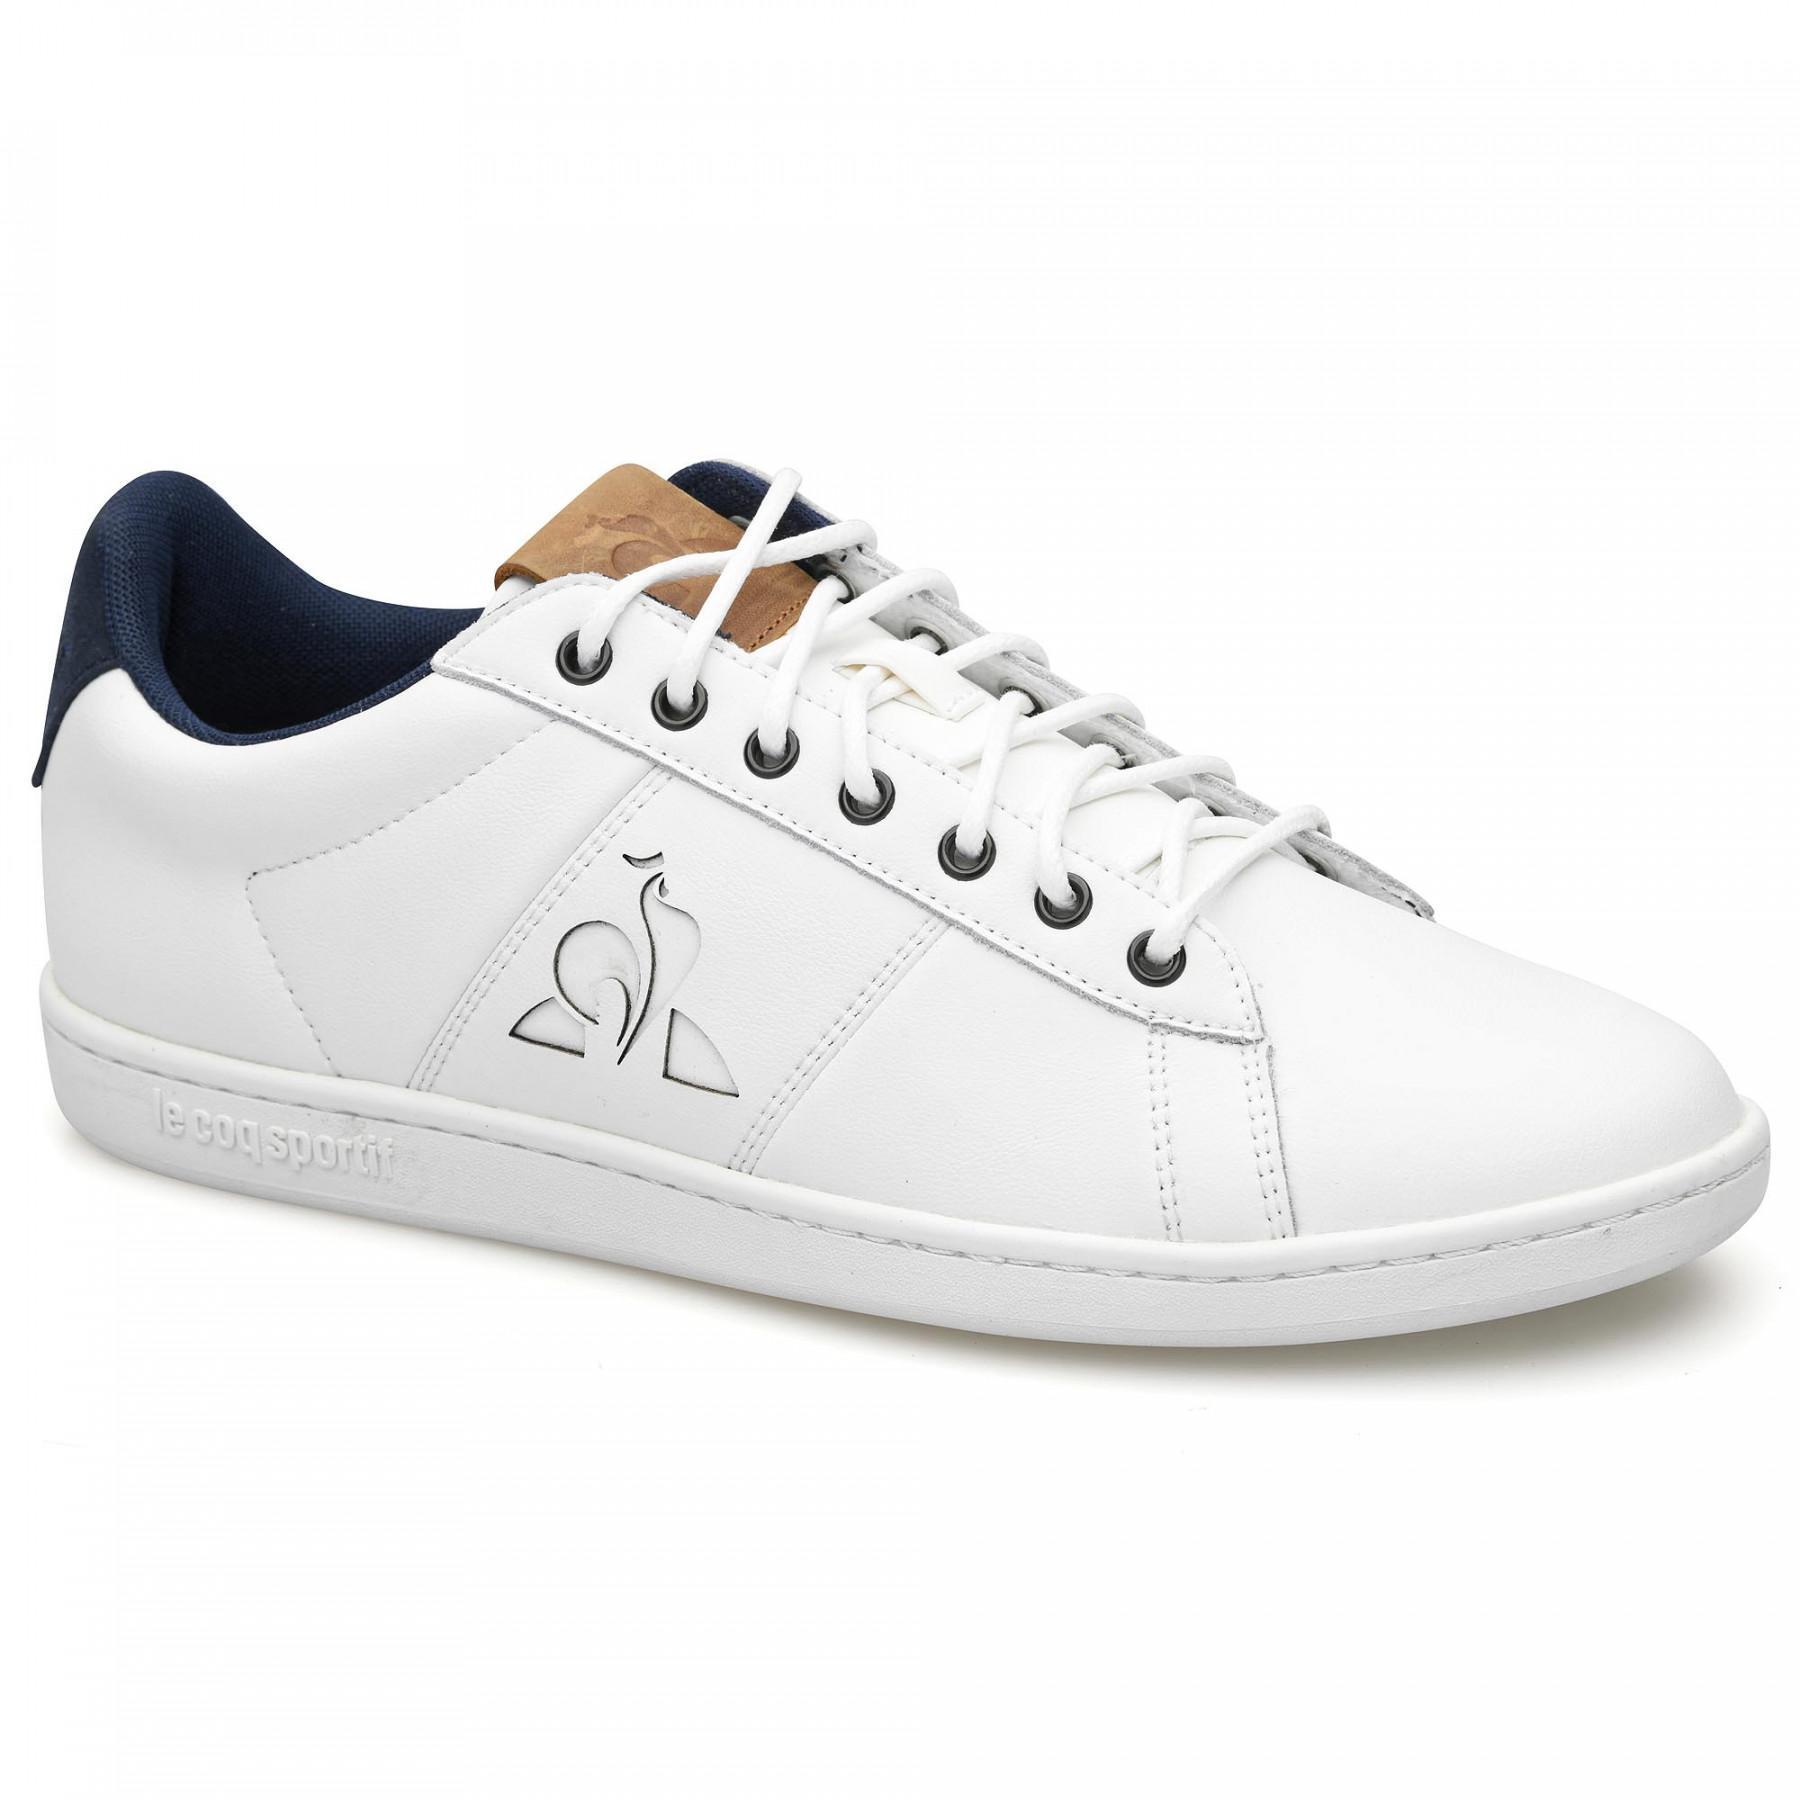 Formadores Le Coq Sportif Master court waxy